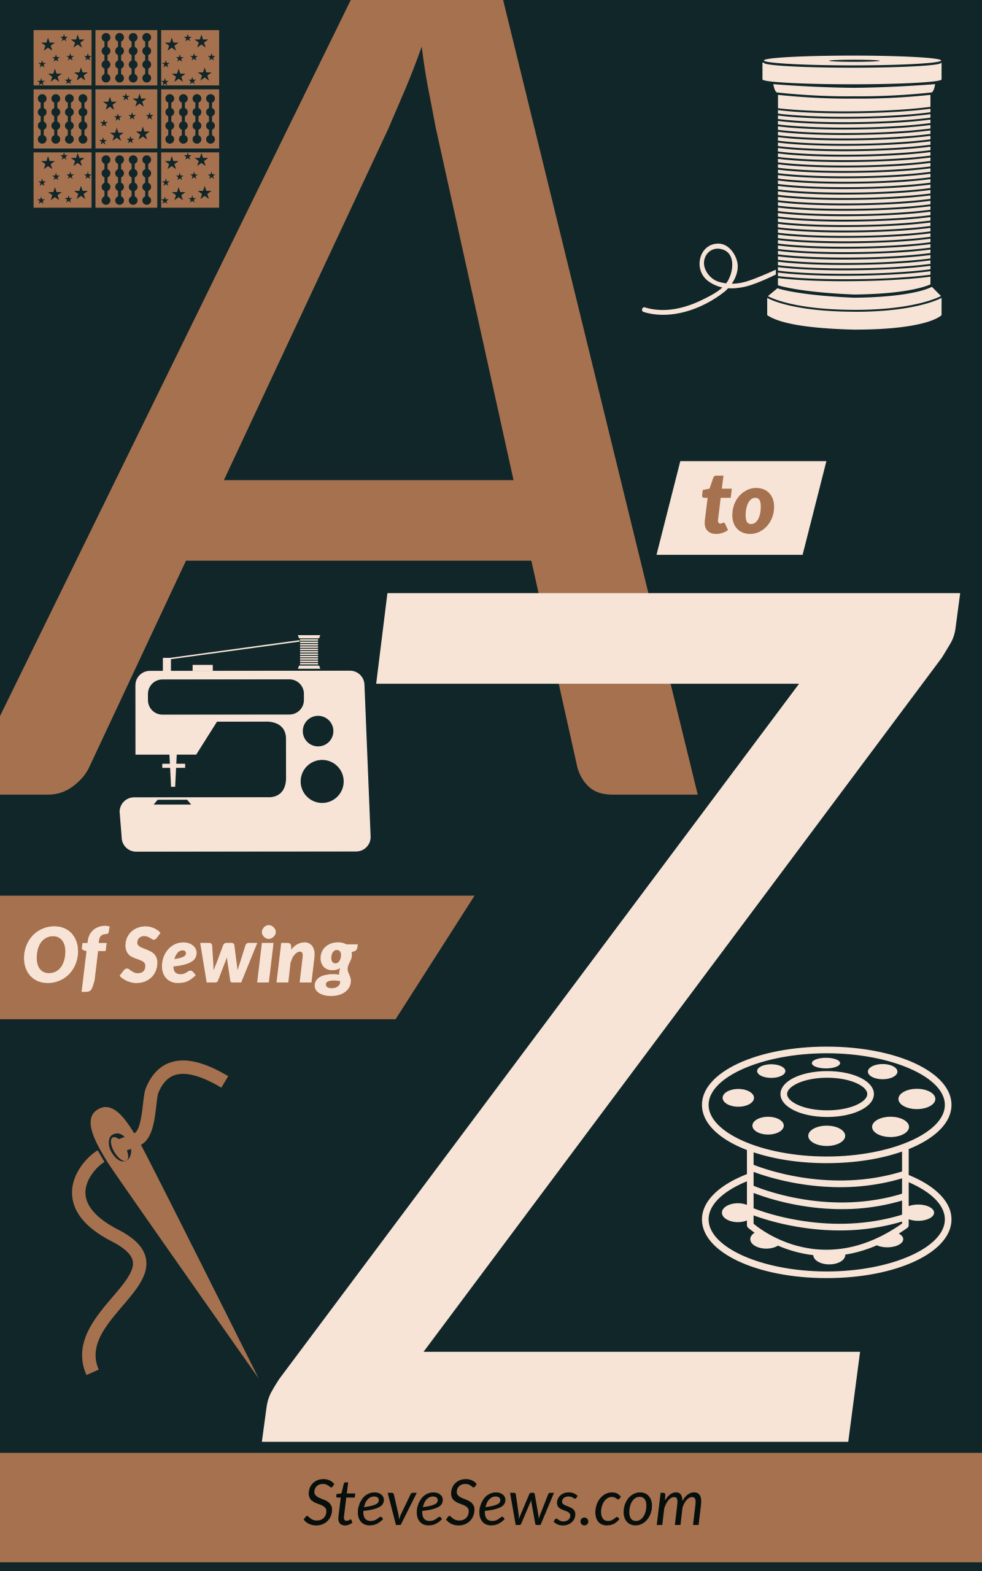 A-Z of Sewing - I share things related to sewing starting with the letter A and going to the last letter, Z. #sewing